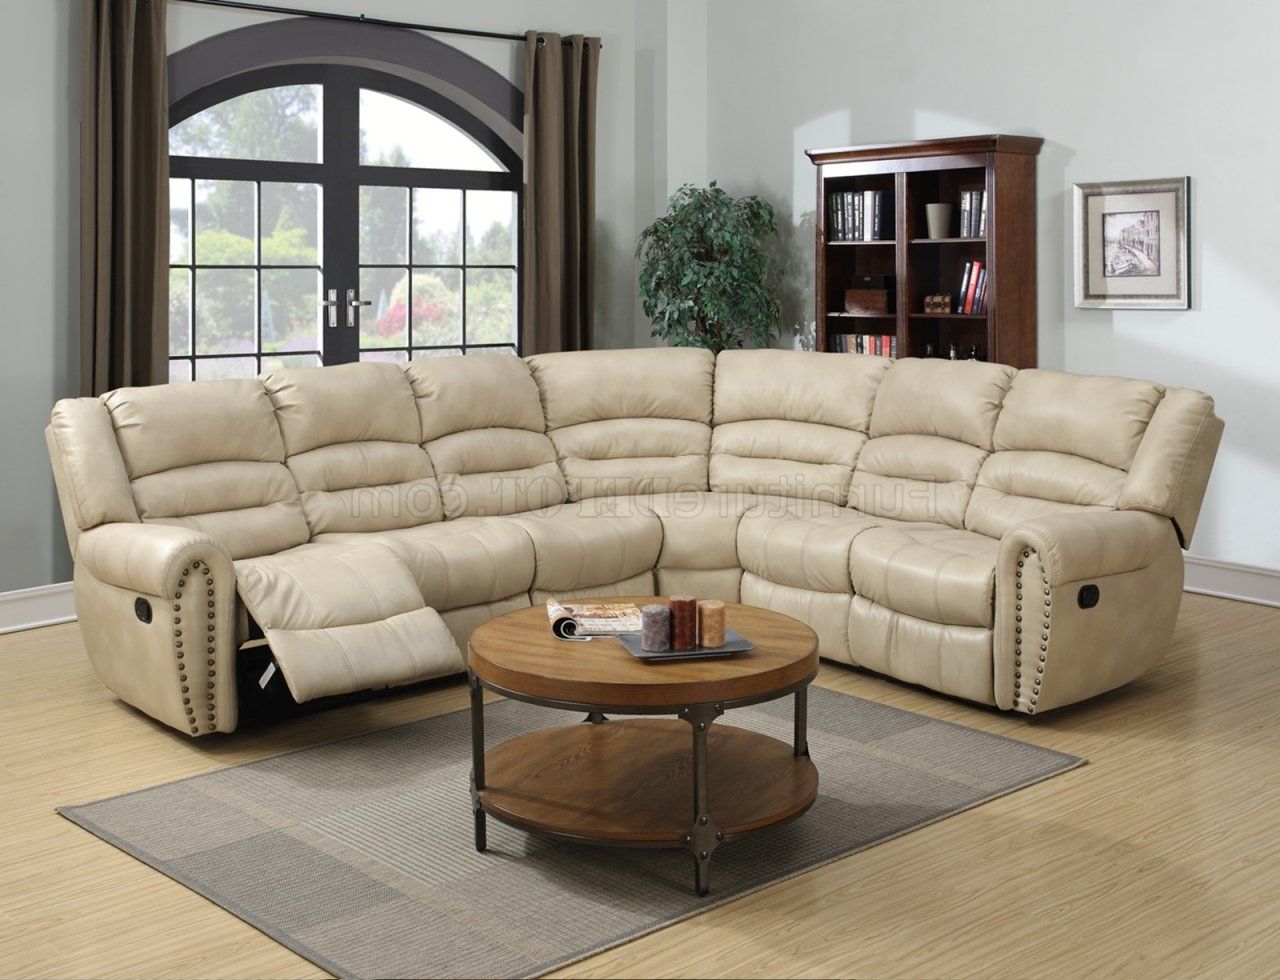 G687 Motion Sectional Sofa In Beige Bonded Leatherglory Regarding Small L Shaped Sectional Sofas In Beige (Gallery 4 of 20)